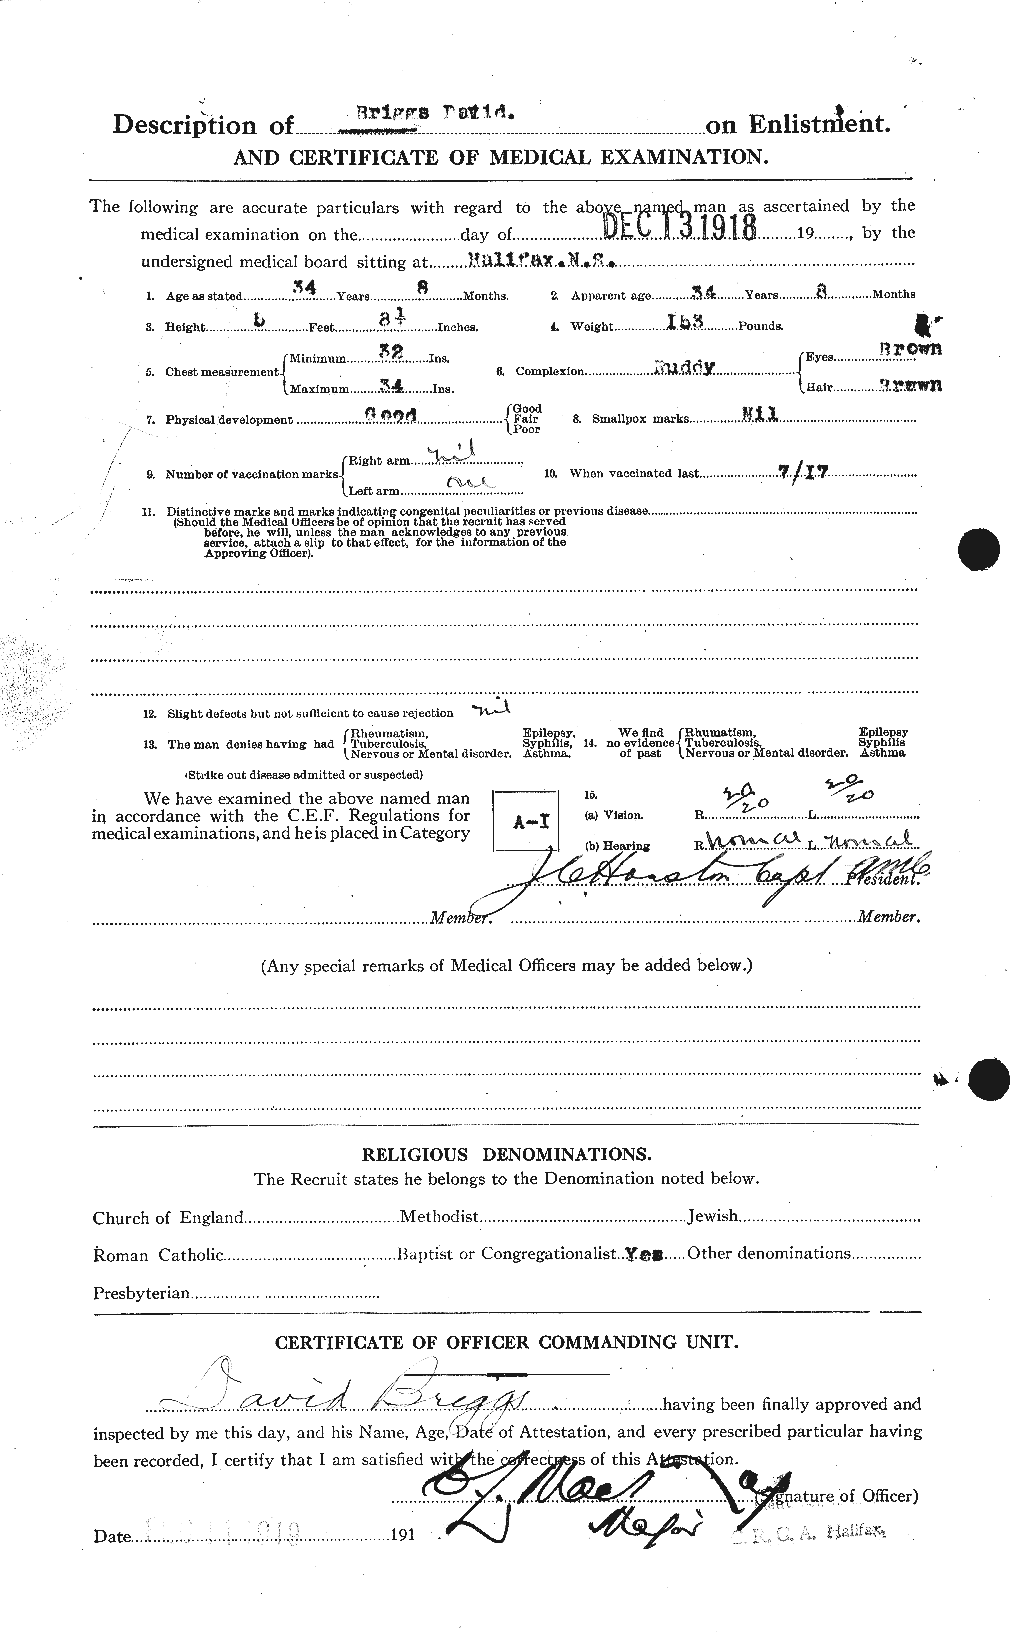 Personnel Records of the First World War - CEF 263990b